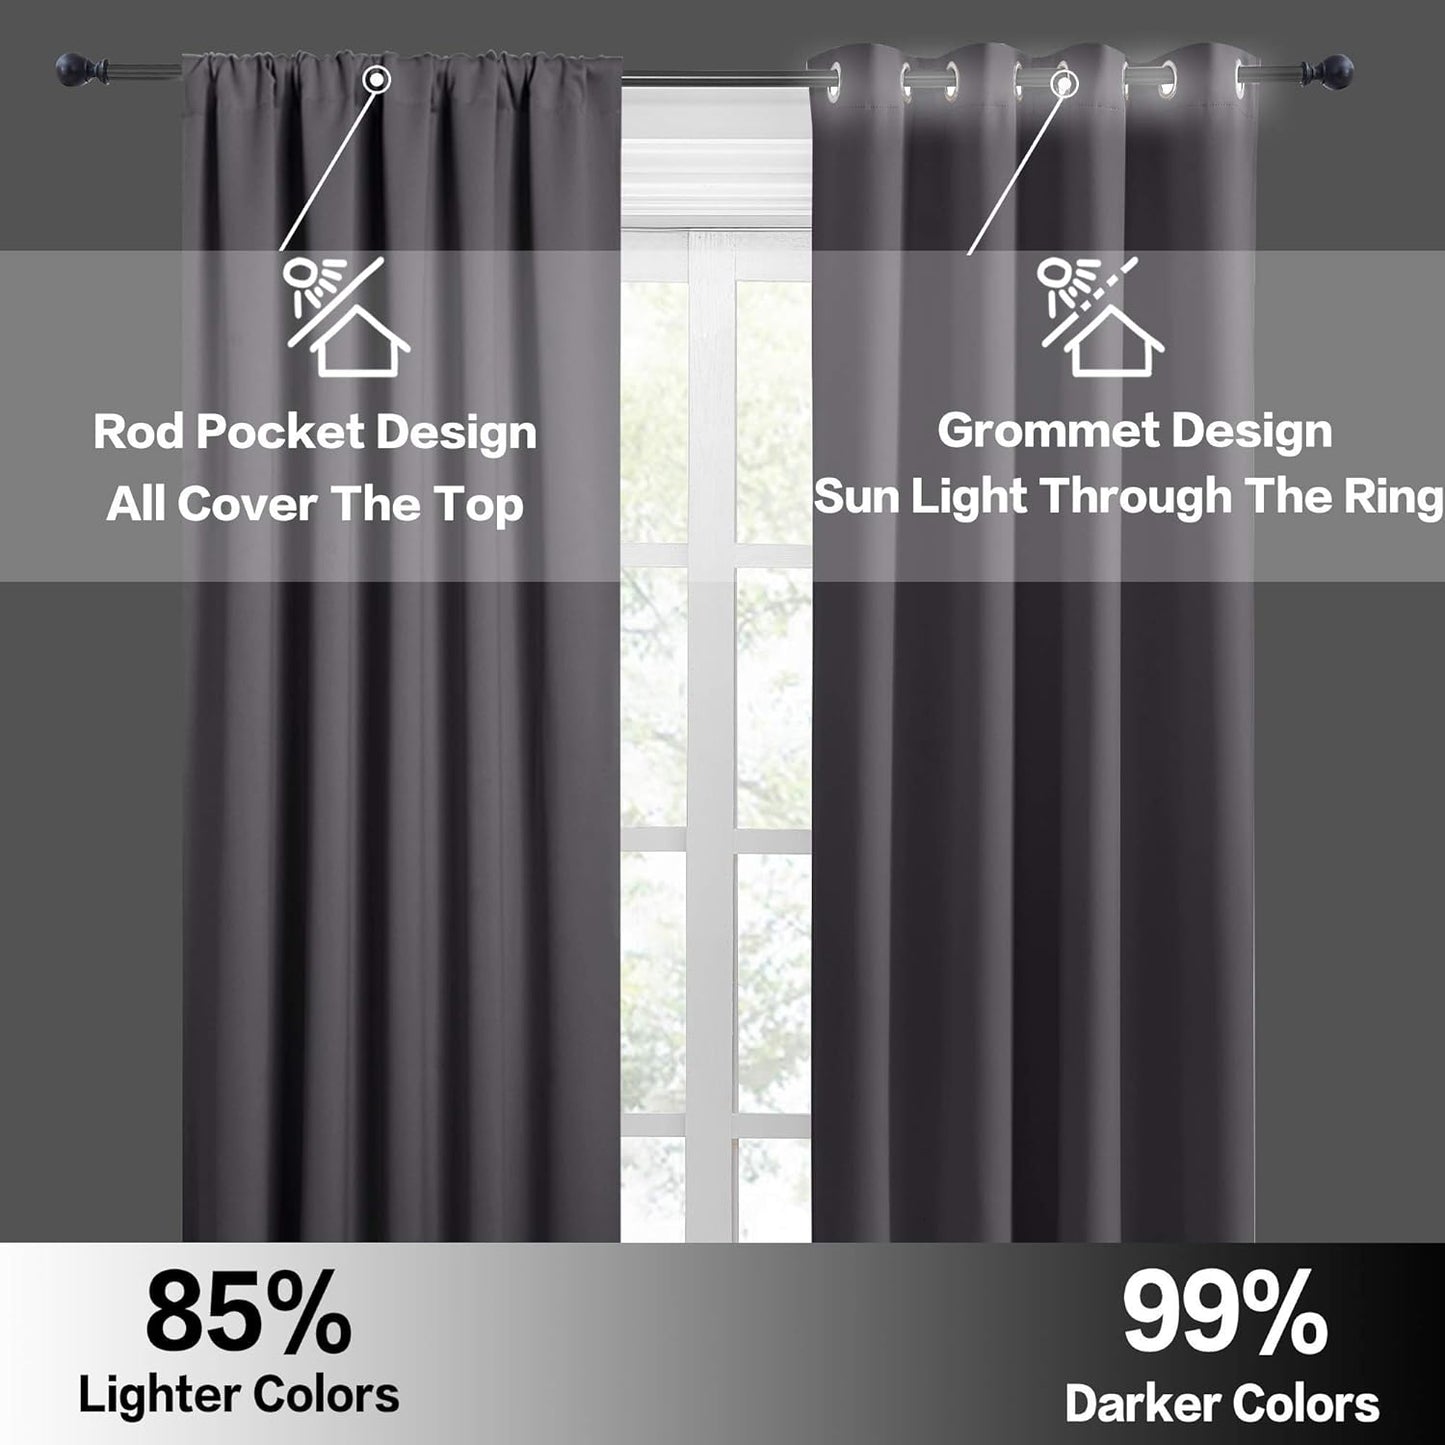 RYB HOME Short Curtains Gray Half Window Curtains for Bedroom, Privacy Curtain Tiers for Windows, Energy Saving Curtain Tiers for Bathroom Shades, Wide 42 X Long 36 Inches per Panel, Grey, Set of 2  RYB HOME   